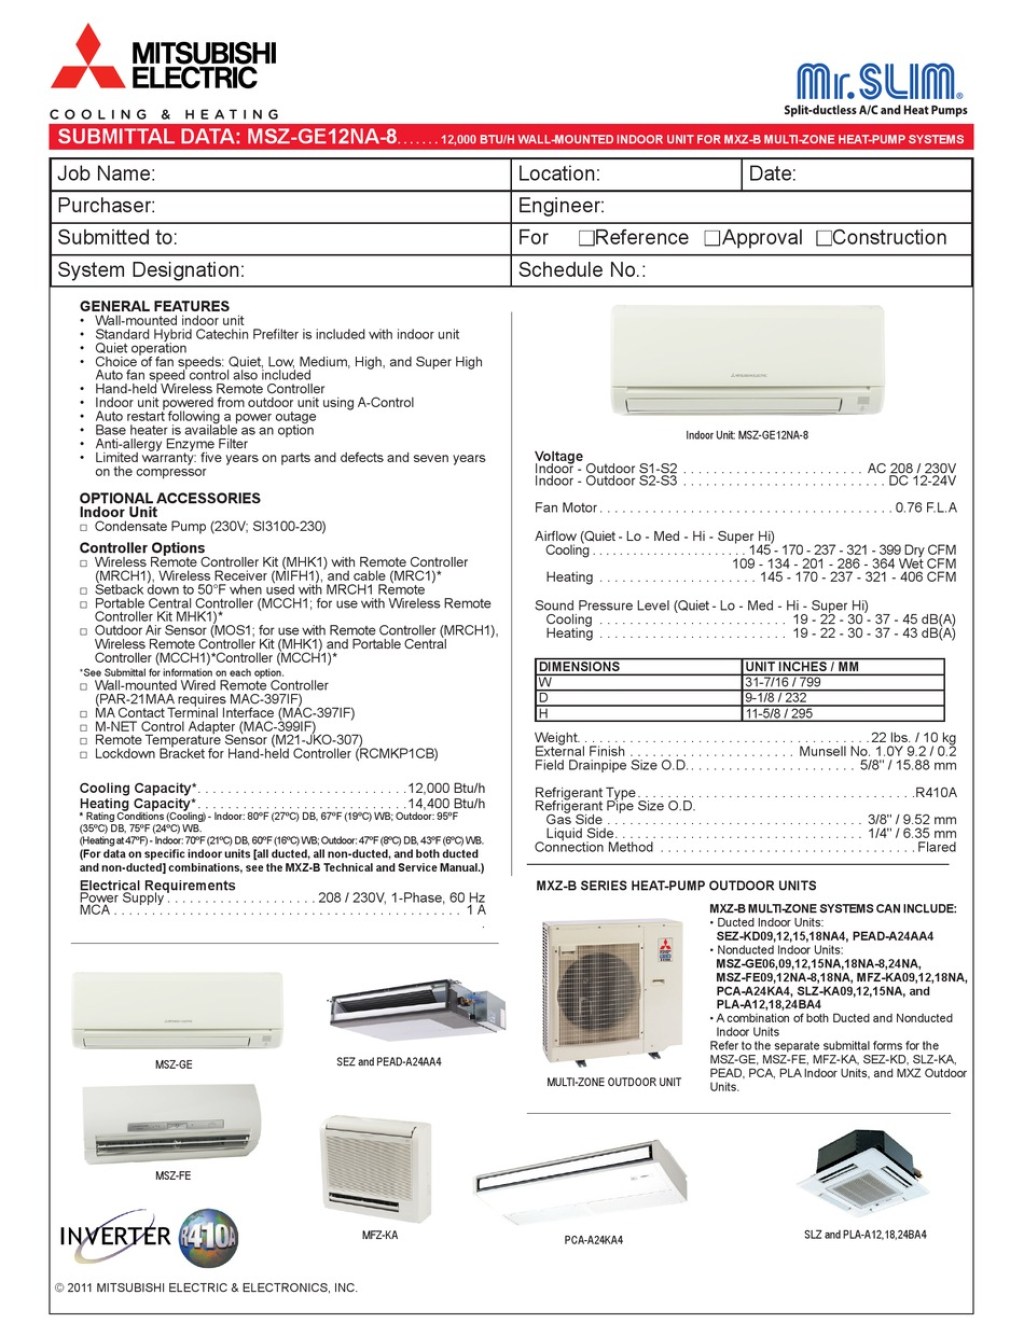 Picture of: MITSUBISHI ELECTRIC MSZ-GENA- SUBMITTAL DATA Pdf Download